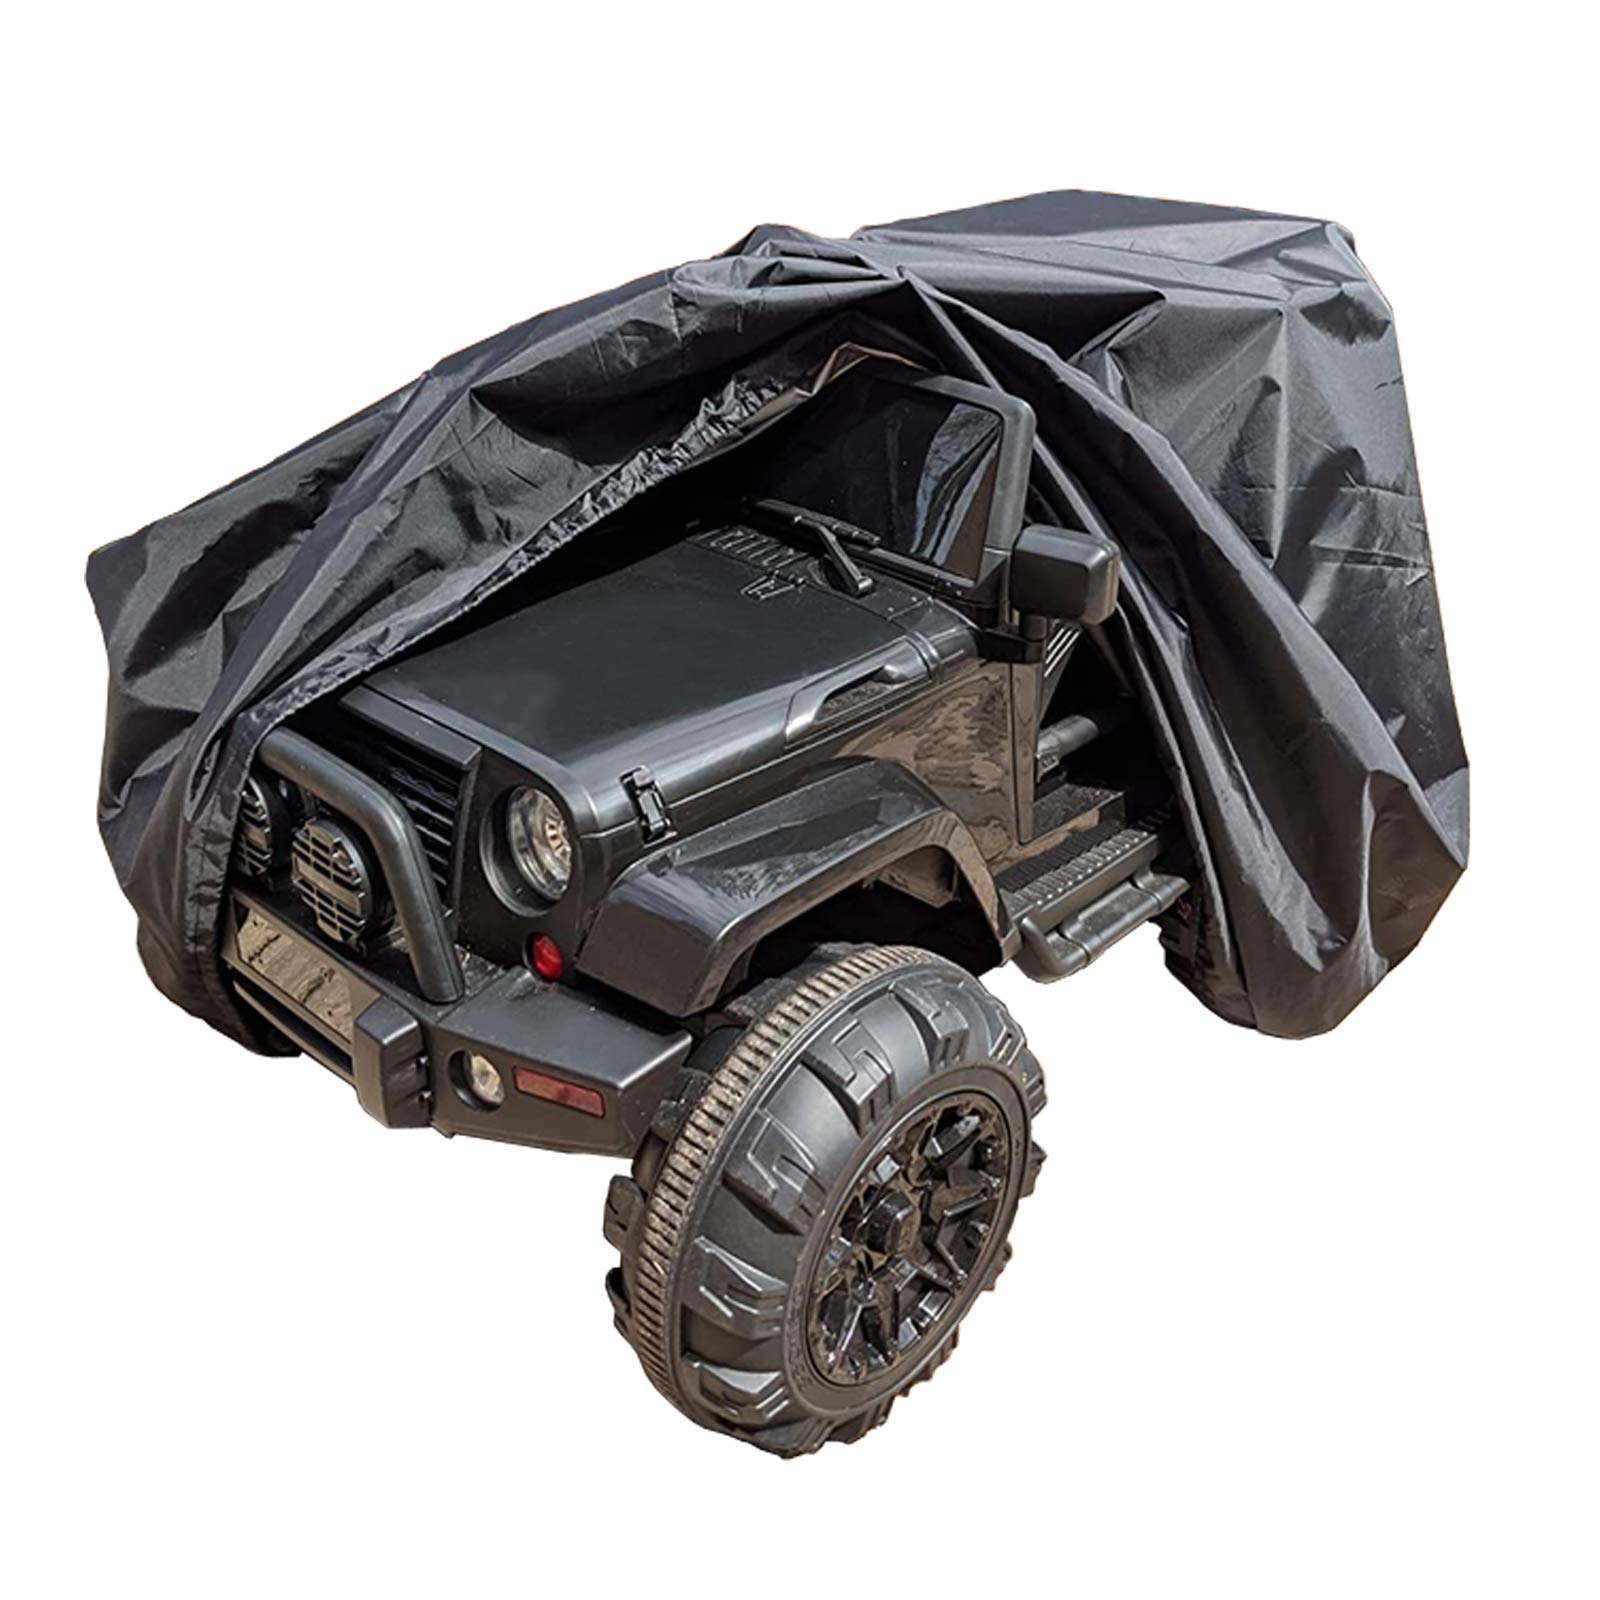 Tonhui Large Ride-On Truck Toy Car Cover, Outdoor Cover For Power Wheels, Kids Electric Car Cover Waterproof All Weather Protect